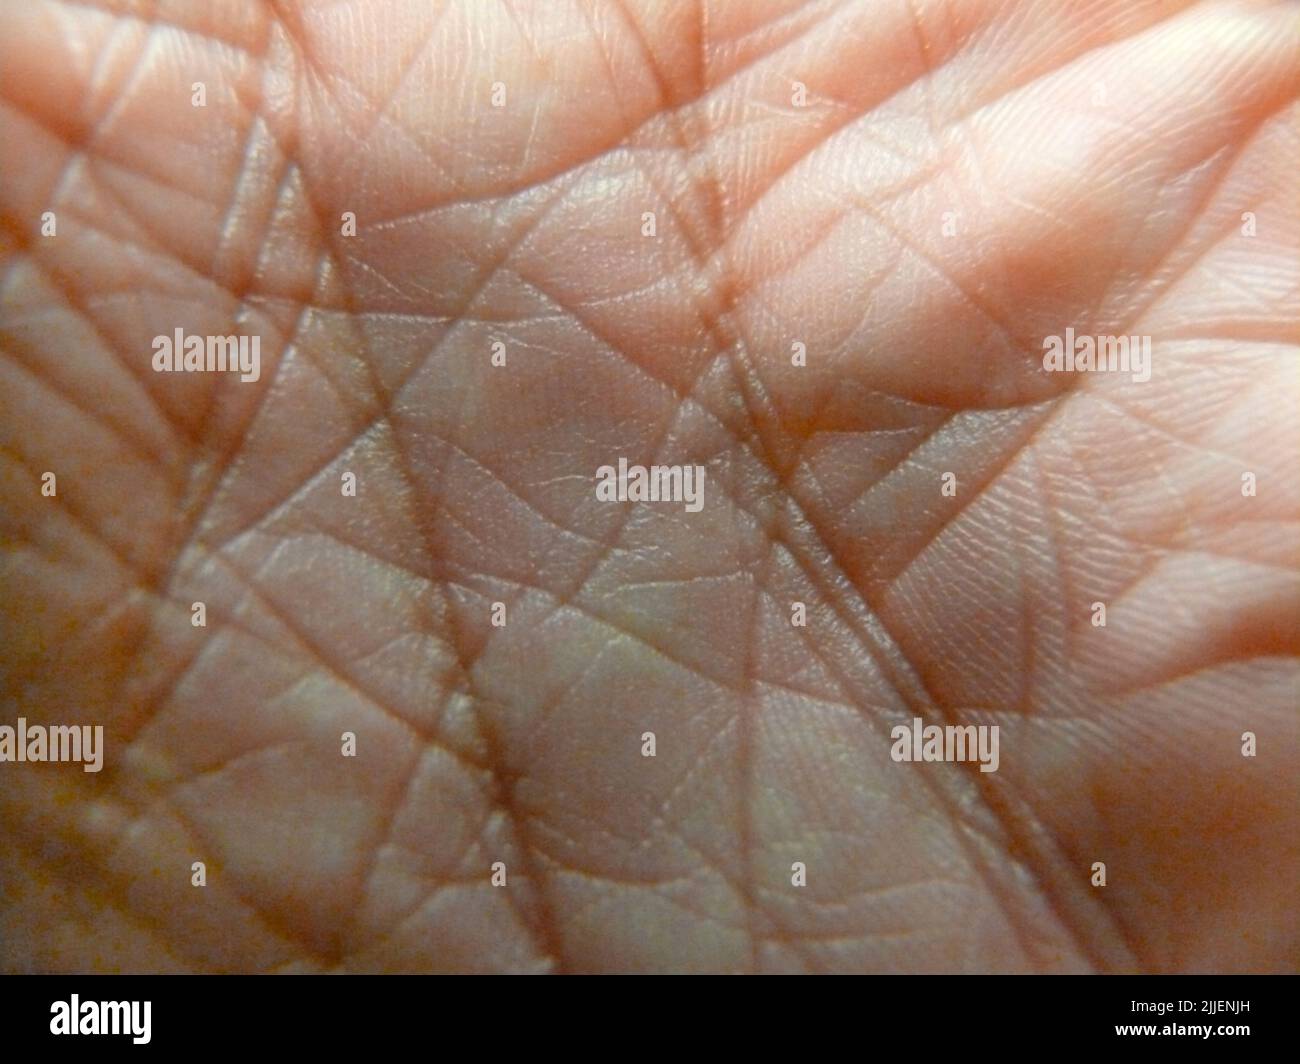 palm of a hand Stock Photo